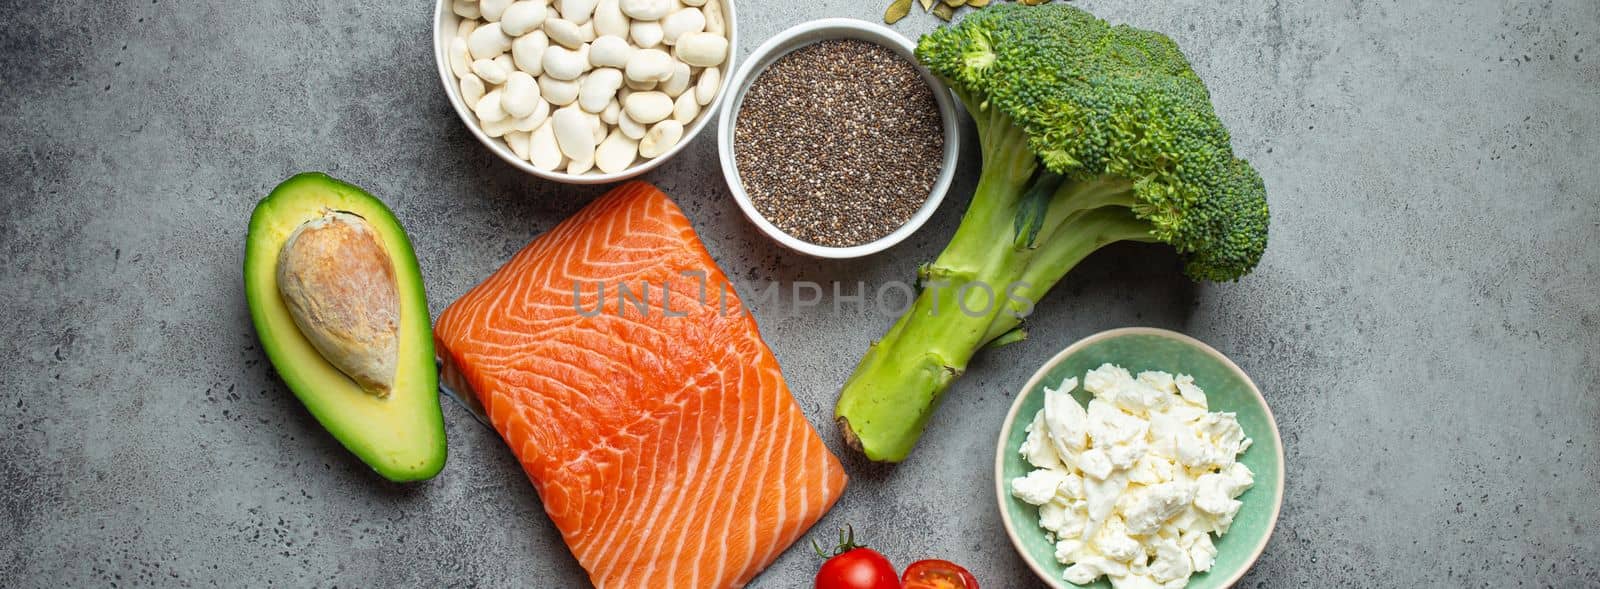 Selection of healthy food products if a person have diabetes: salmon fish, broccoli, avocado, beans, vegetables, seeds on grey background from above. Healthy diabetes diet by its_al_dente